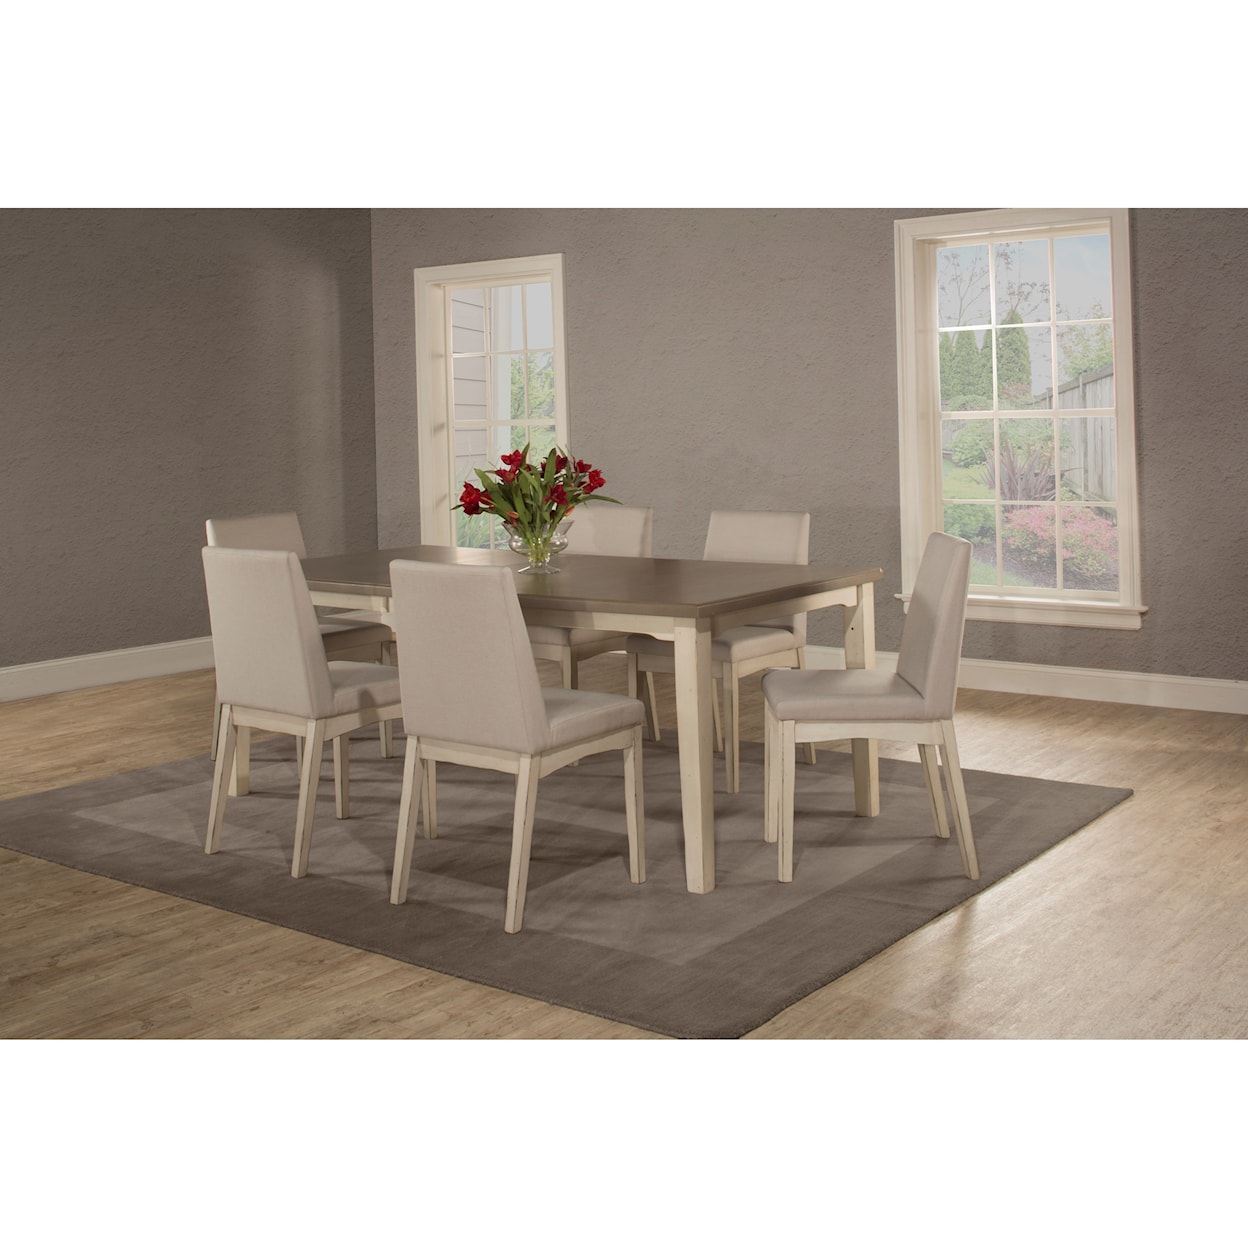 Hillsdale Clarion Upholstered Dining Chair - Set of 2